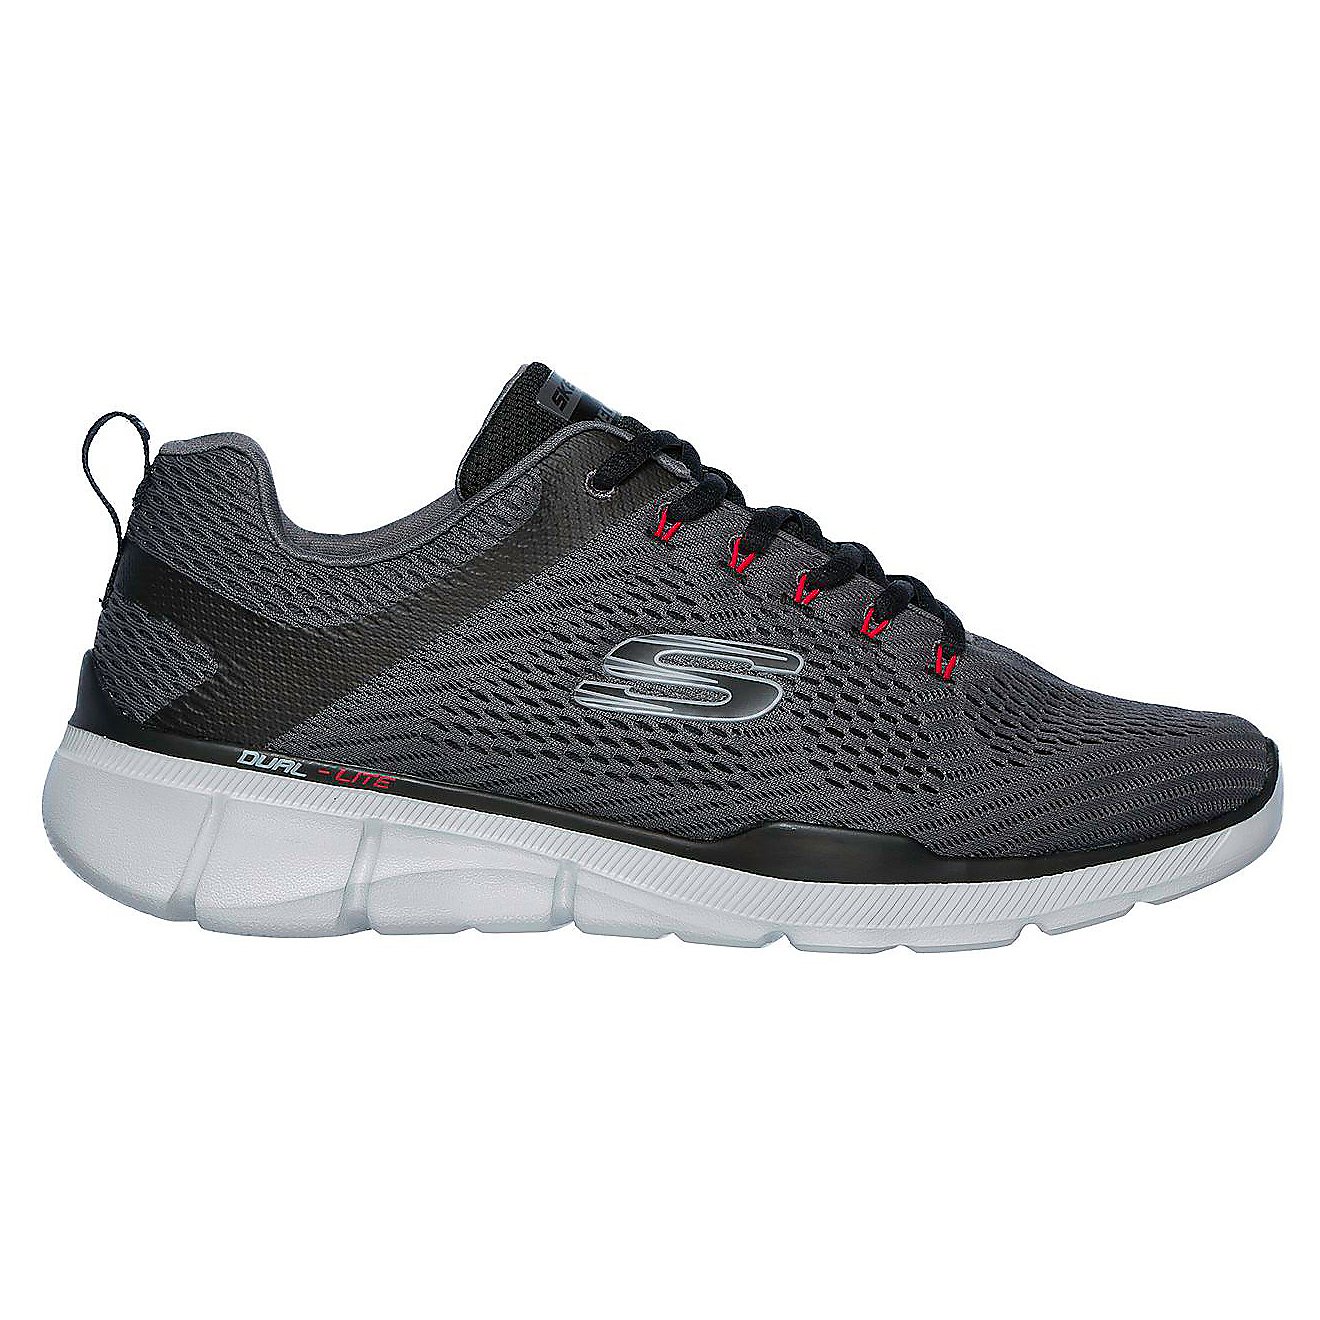 SKECHERS Men's Relaxed Fit Equalizer 3.0 Shoes | Academy